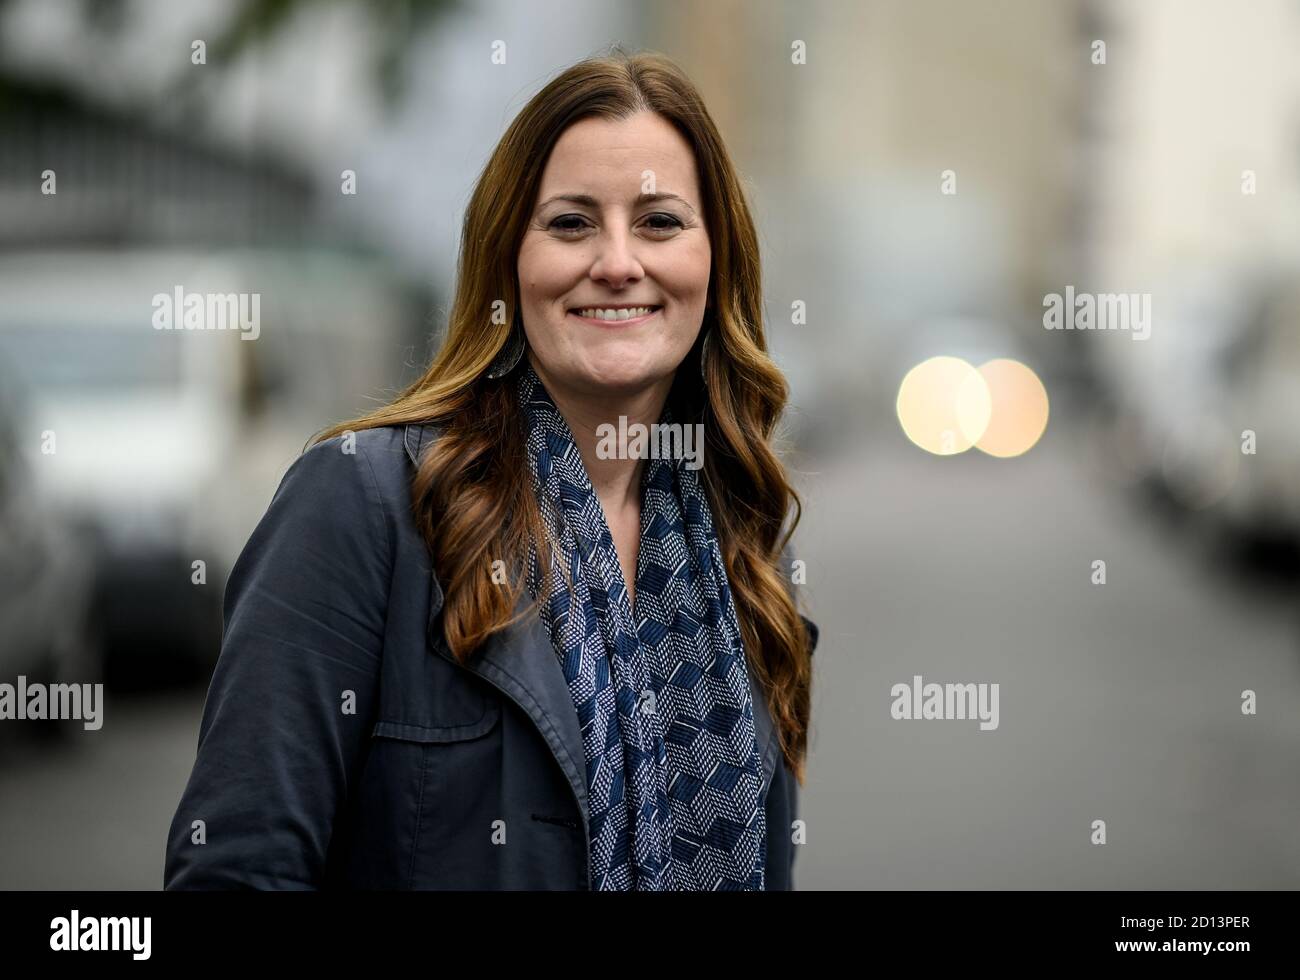 Berlin, Germany. 05th Oct, 2020. Janine Wissler (Die Linke), deputy chairwoman of the Left Party at federal level, on the sidelines of a visit to the federal headquarters of her party. Credit: Britta Pedersen/dpa-Zentralbild/ZB/dpa/Alamy Live News Stock Photo